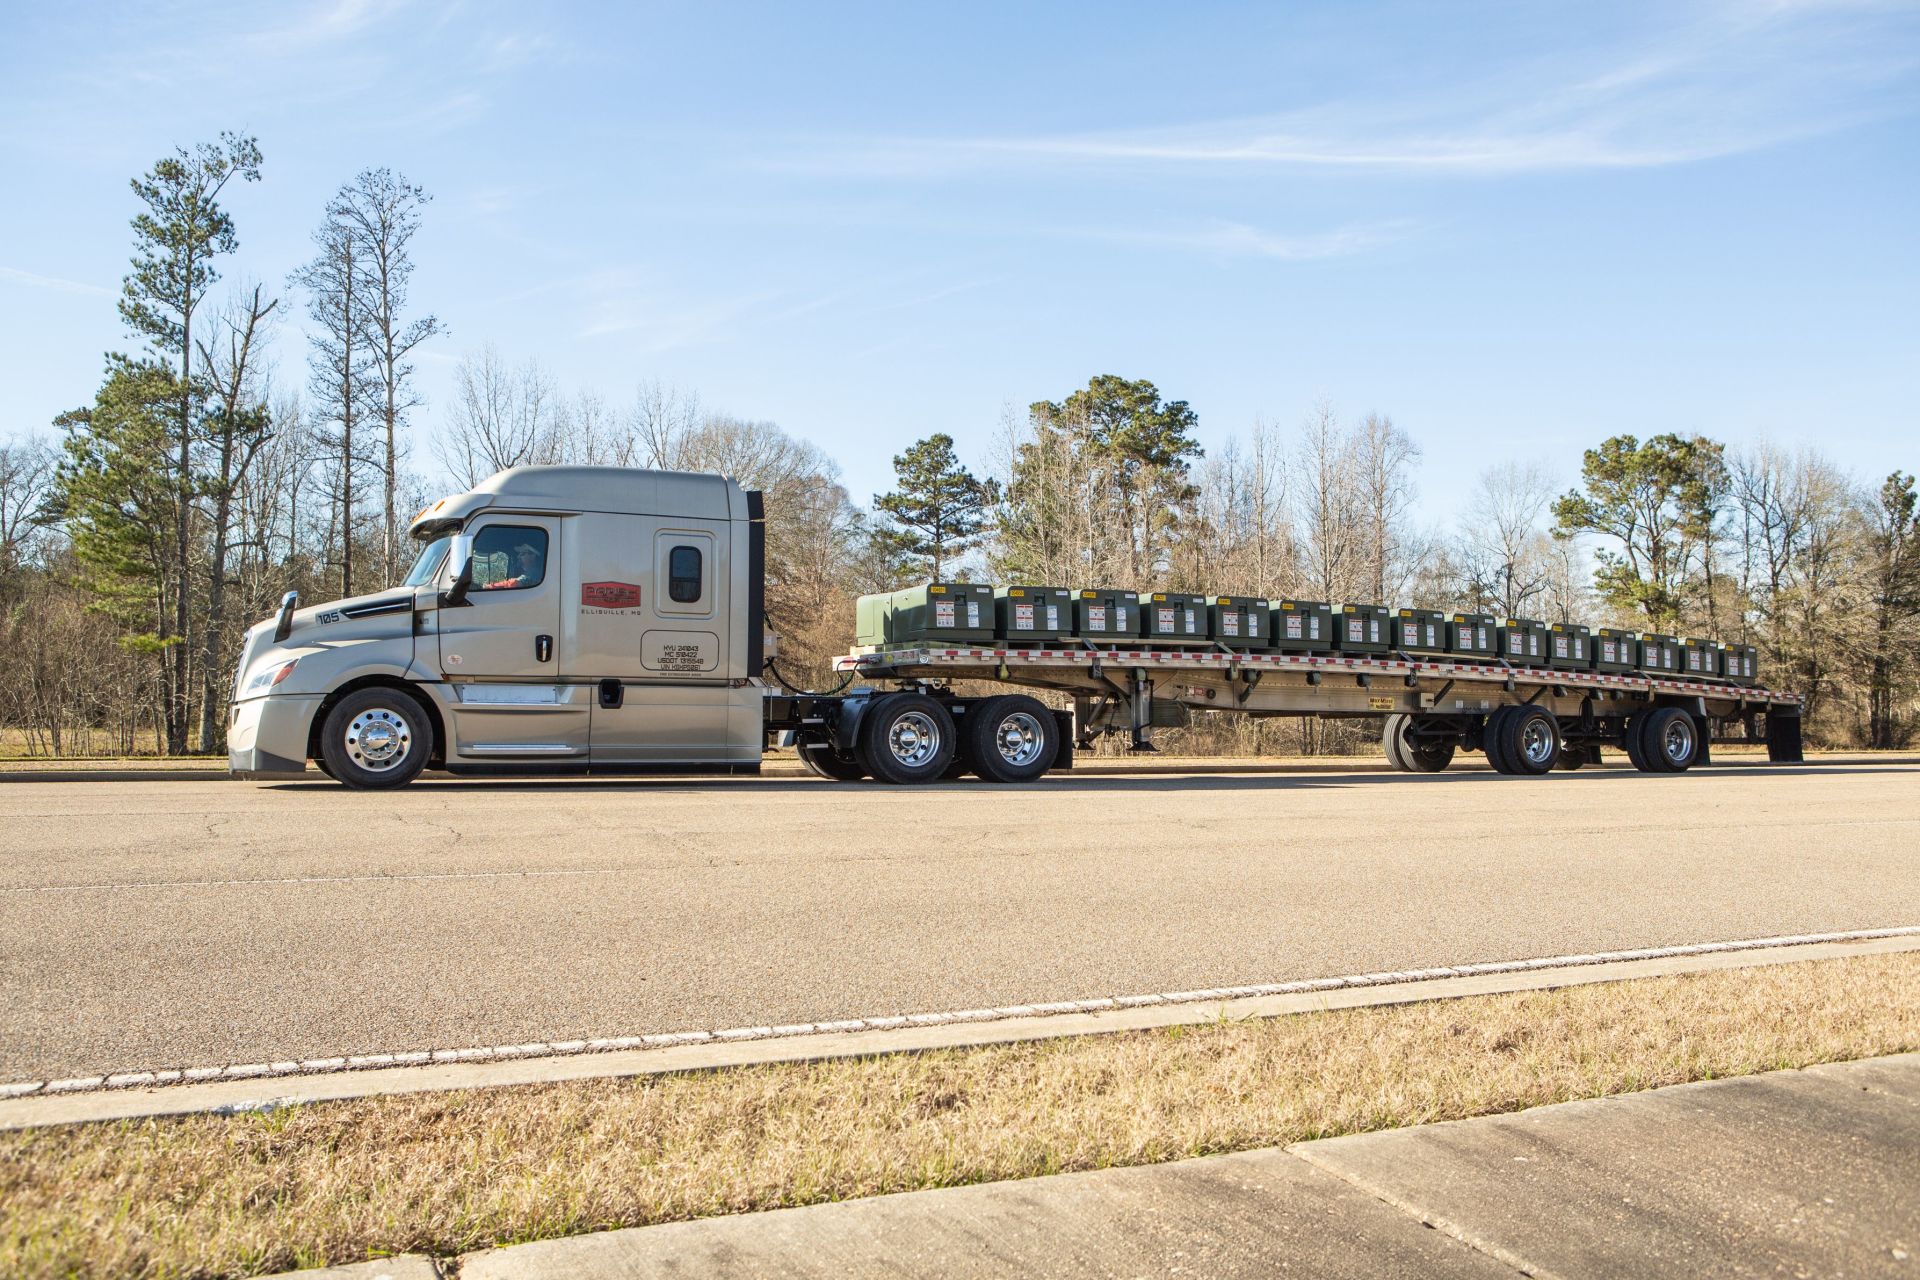 Flatbed trailer from Parish Transport, heavy haul transport and heavy haul shipping company